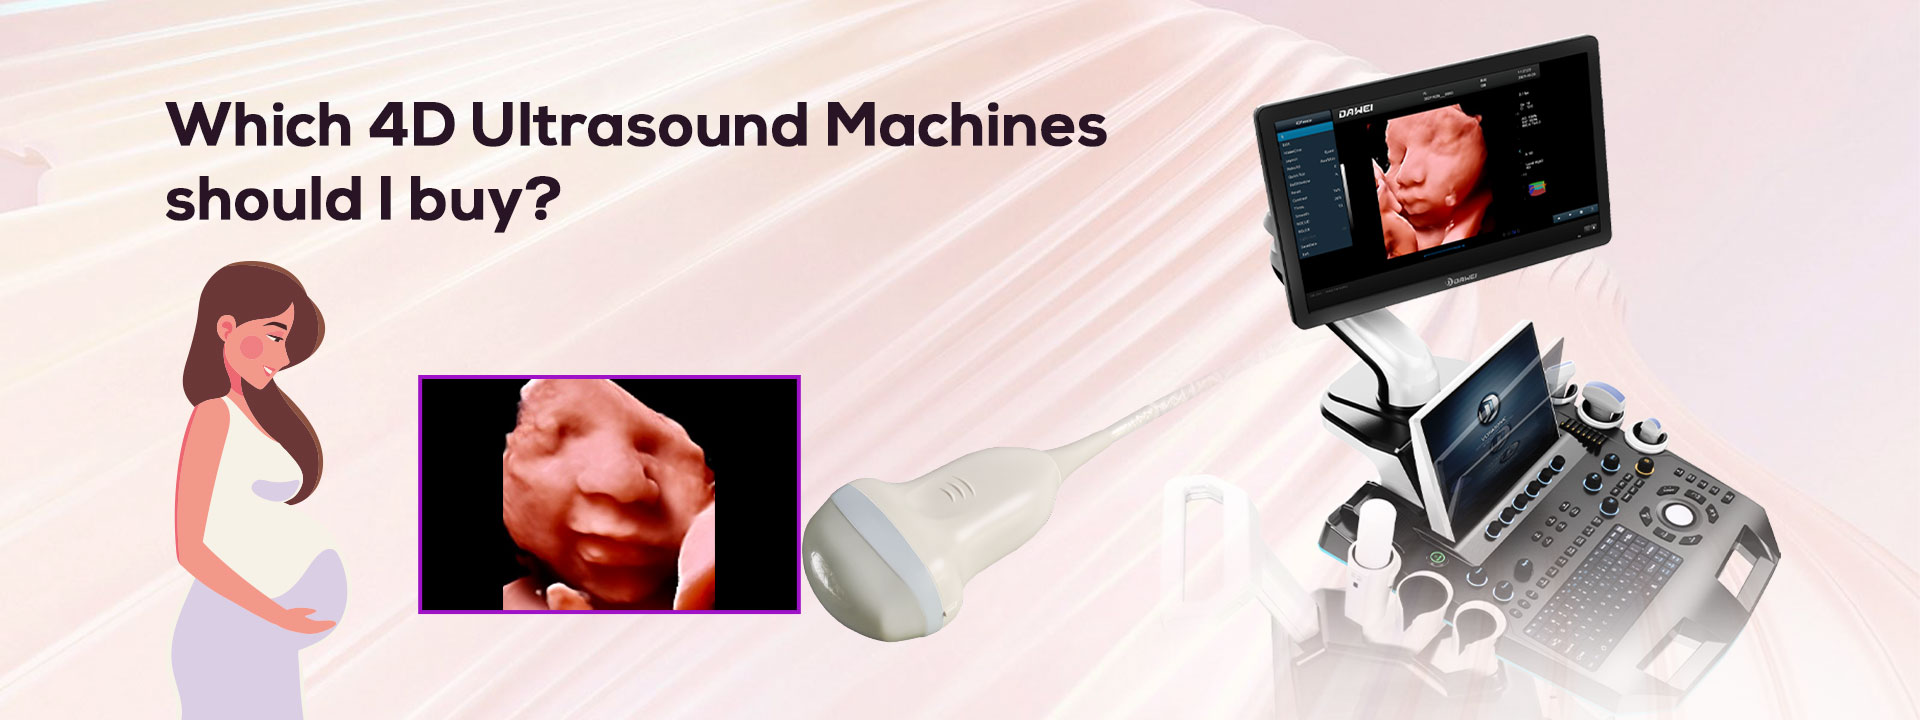 https://www.ultrasounddawei.com/news/which-4d-ultrasound-machines-should-i-buy/